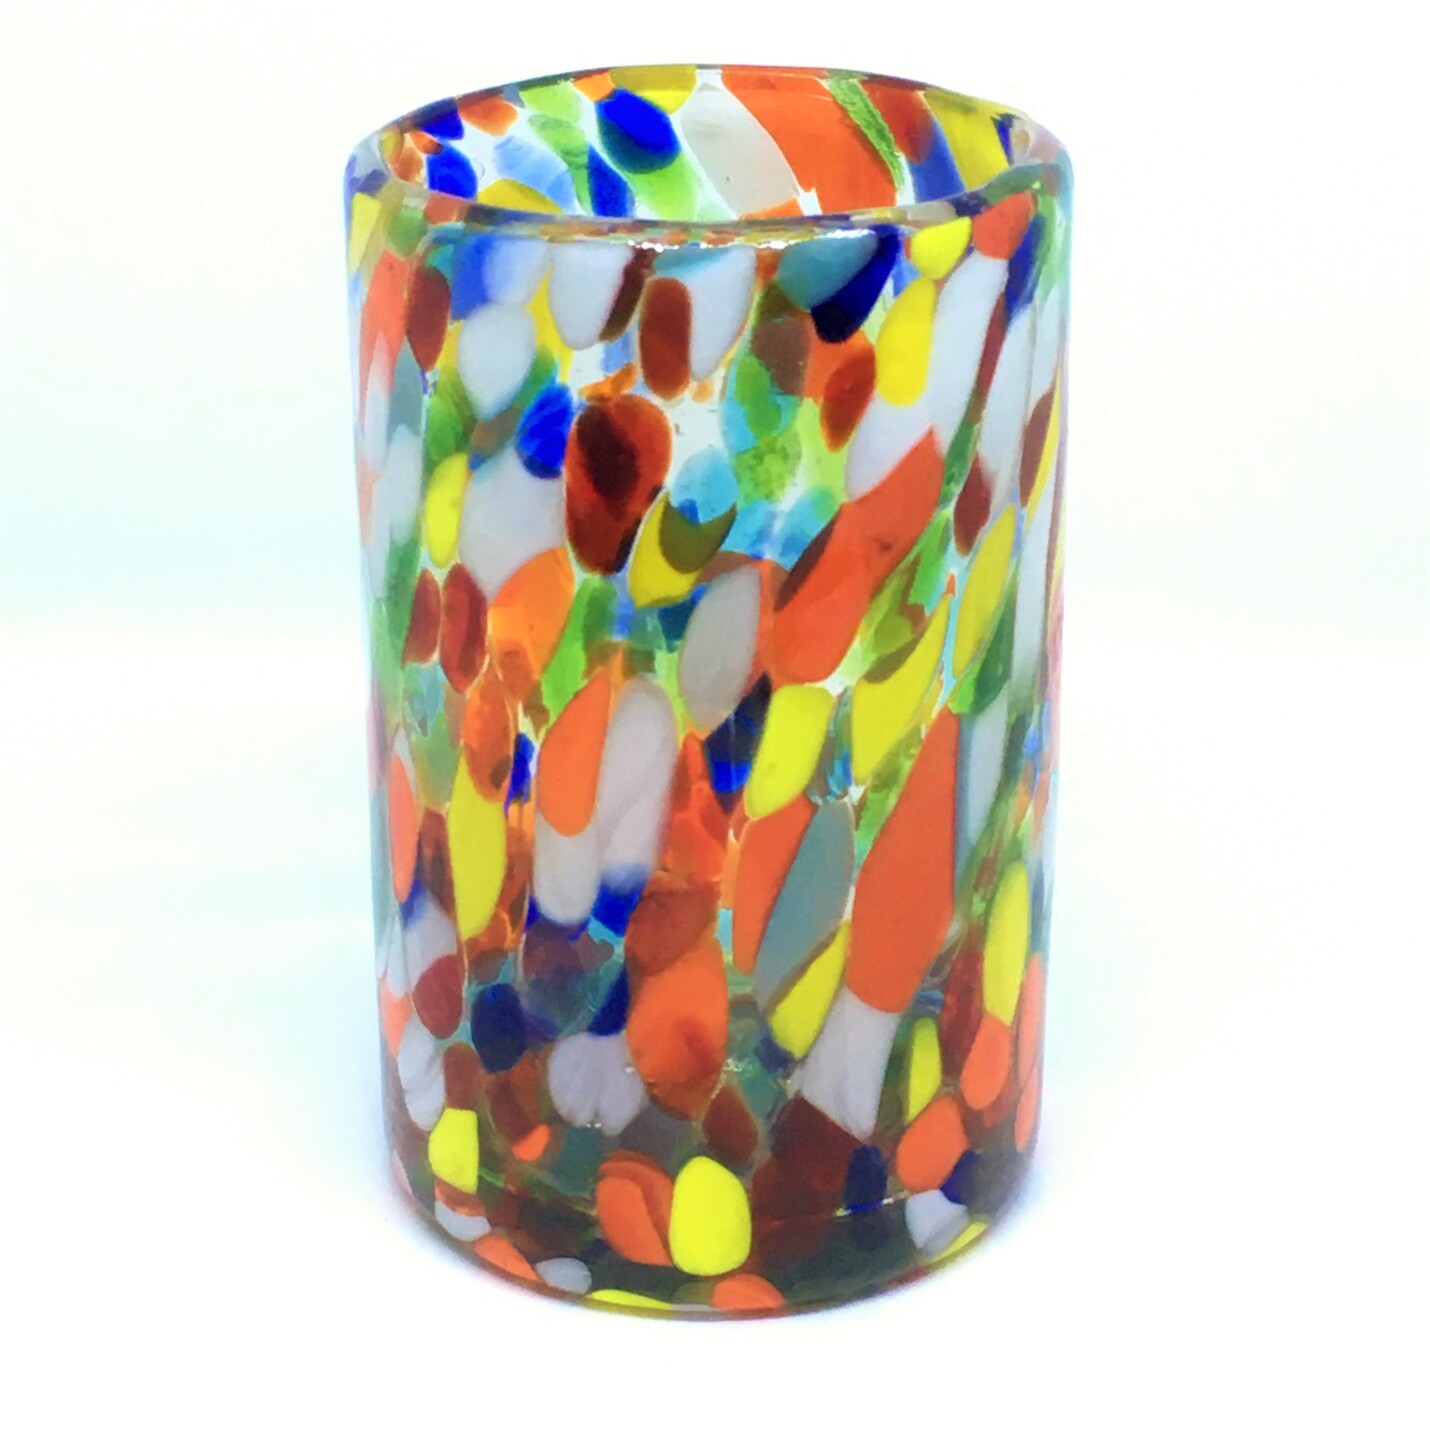 Wholesale Mexican Glasses / Confetti Carnival drinking glasses  / Let the spring come into your home with this colorful set of glasses. The multicolor glass decoration makes them a standout in any place.